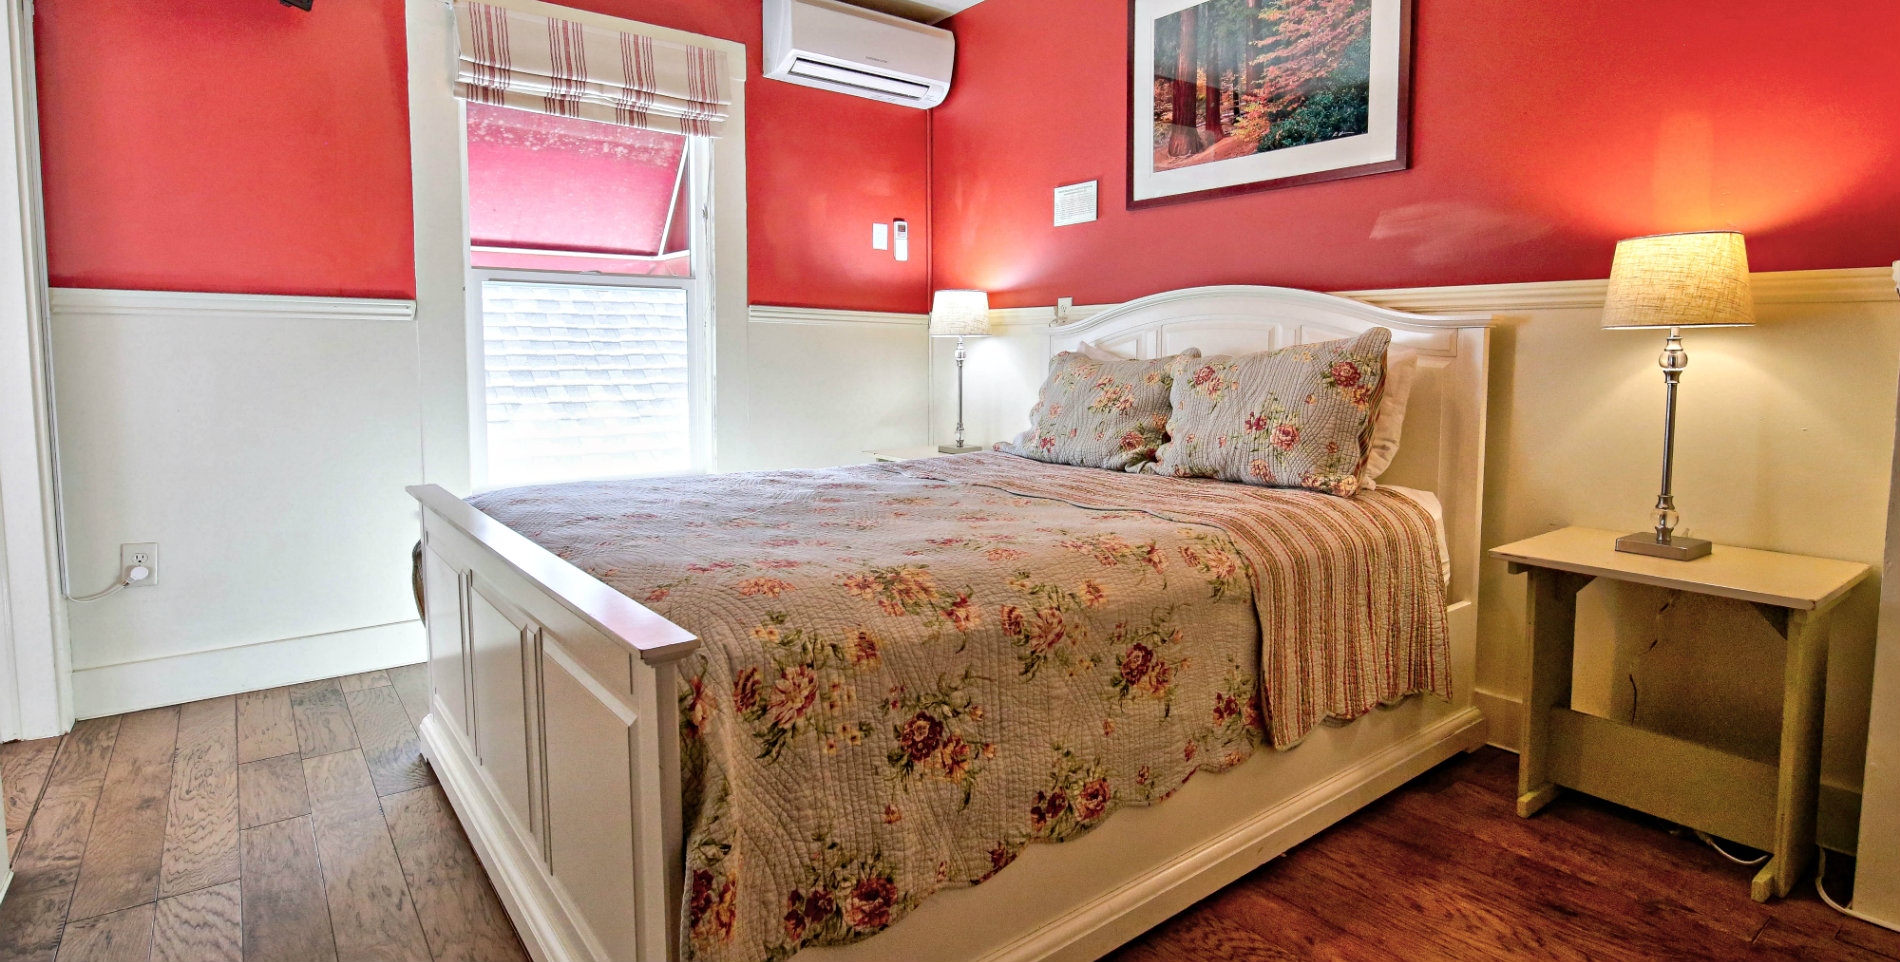 Red guest bedroom with white chair rail paneling, hardwood floors, and lovely floral bedding